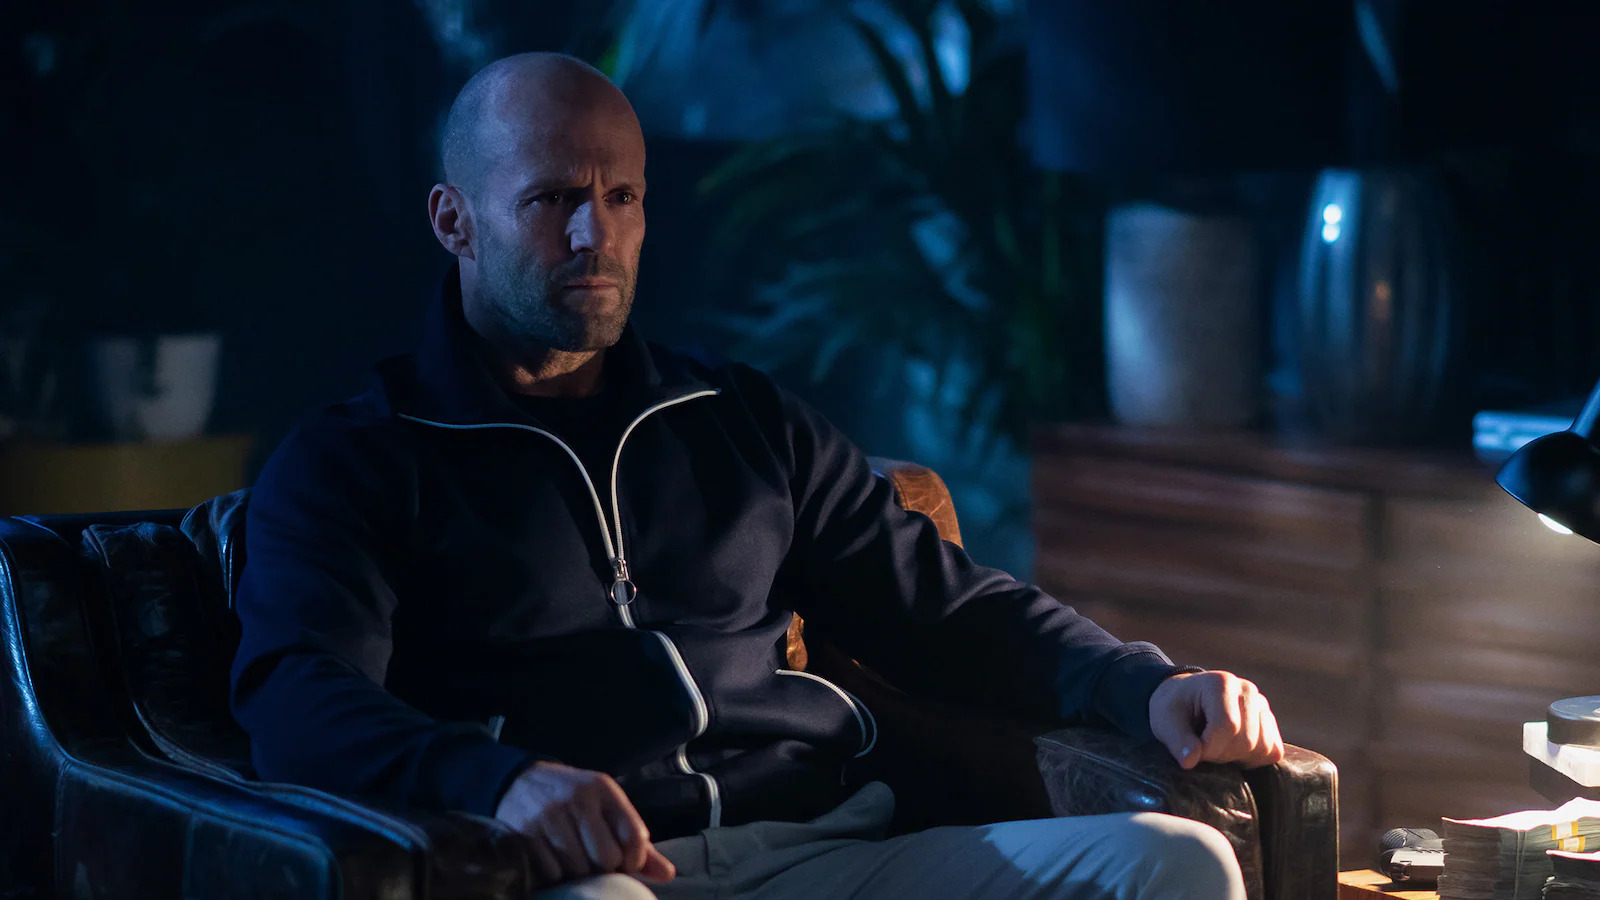 Beekeeper Release Date, Cast, And More For David Ayer's New Jason Statham Action Movie